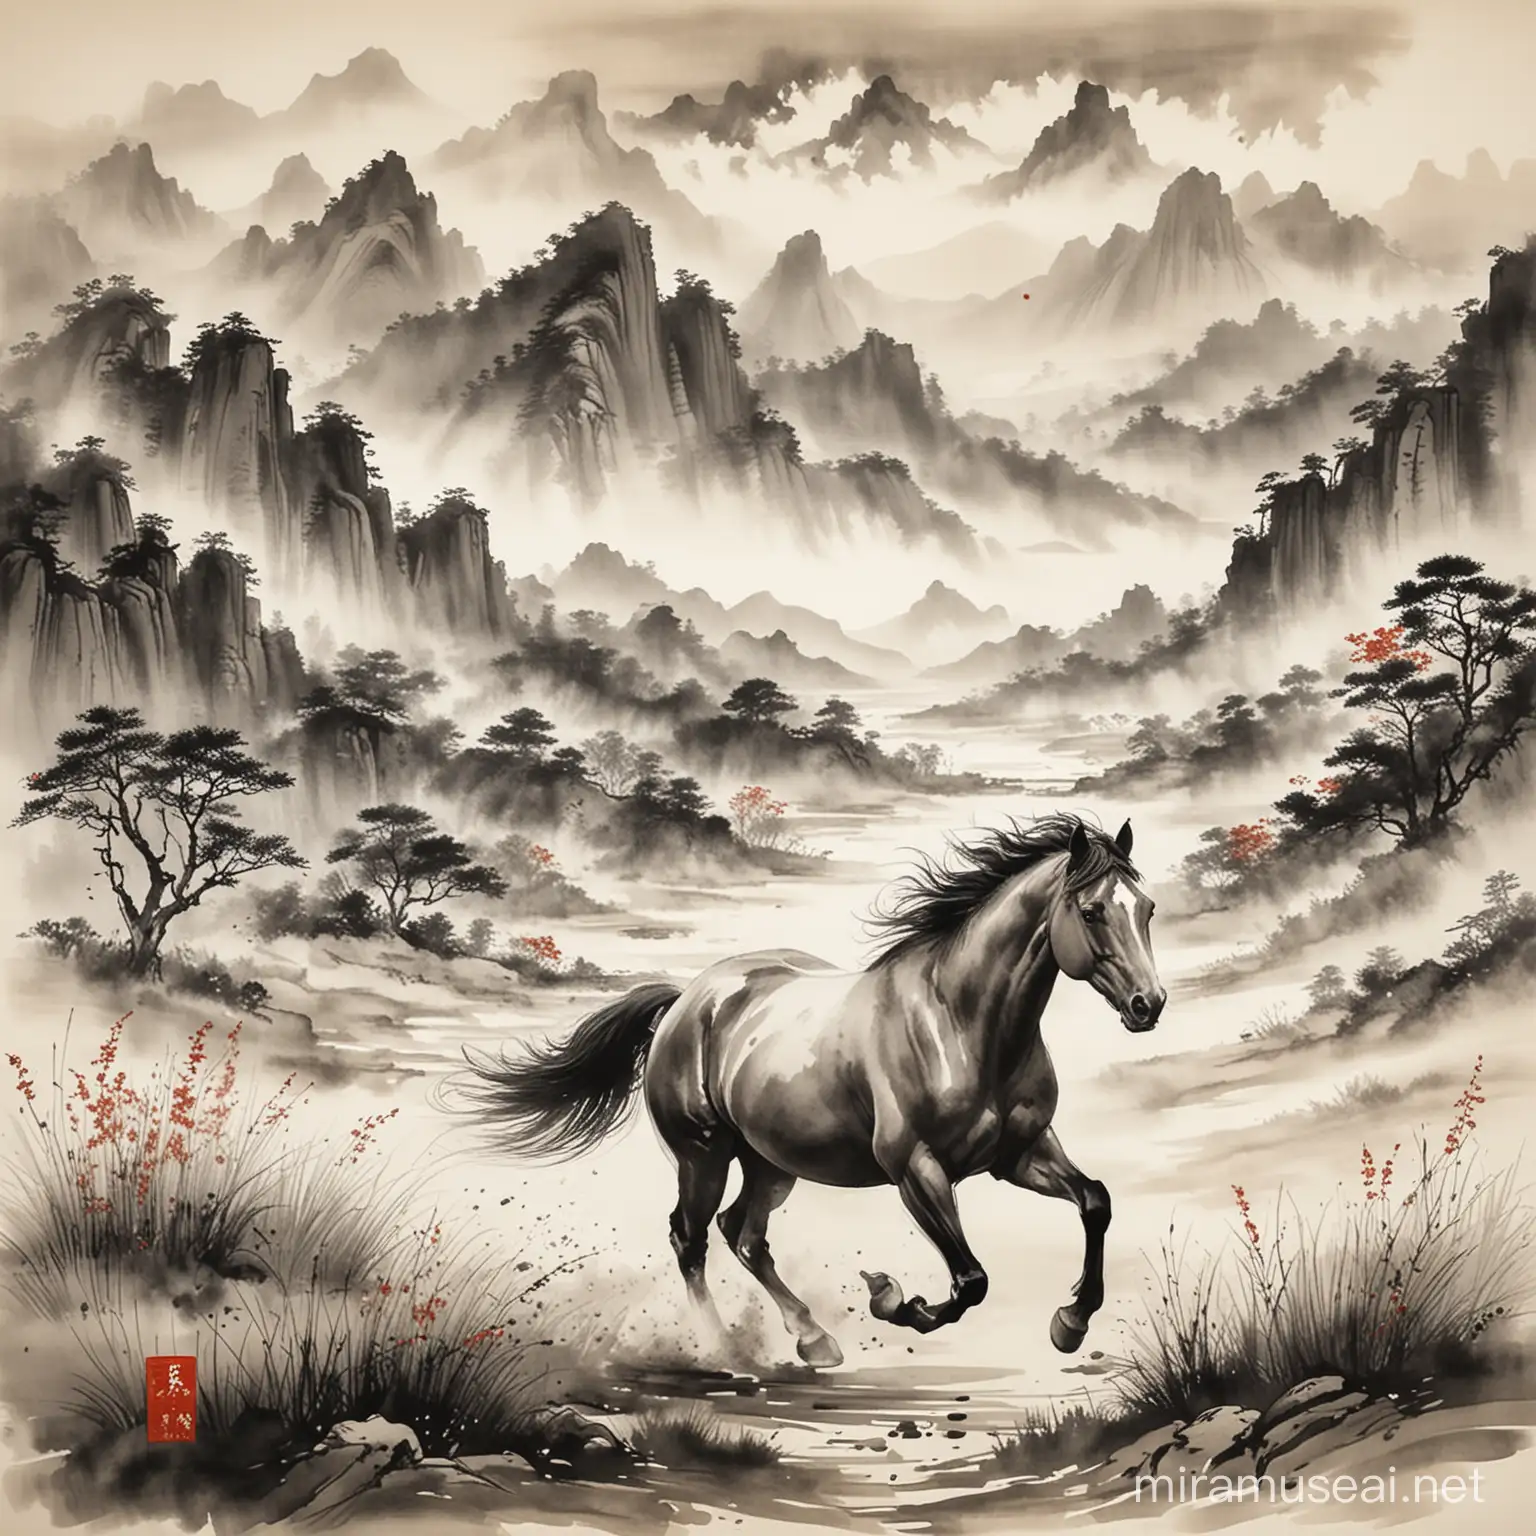 horse running through a field with mountains in the background, windy scene
traditional chinese ink painting style